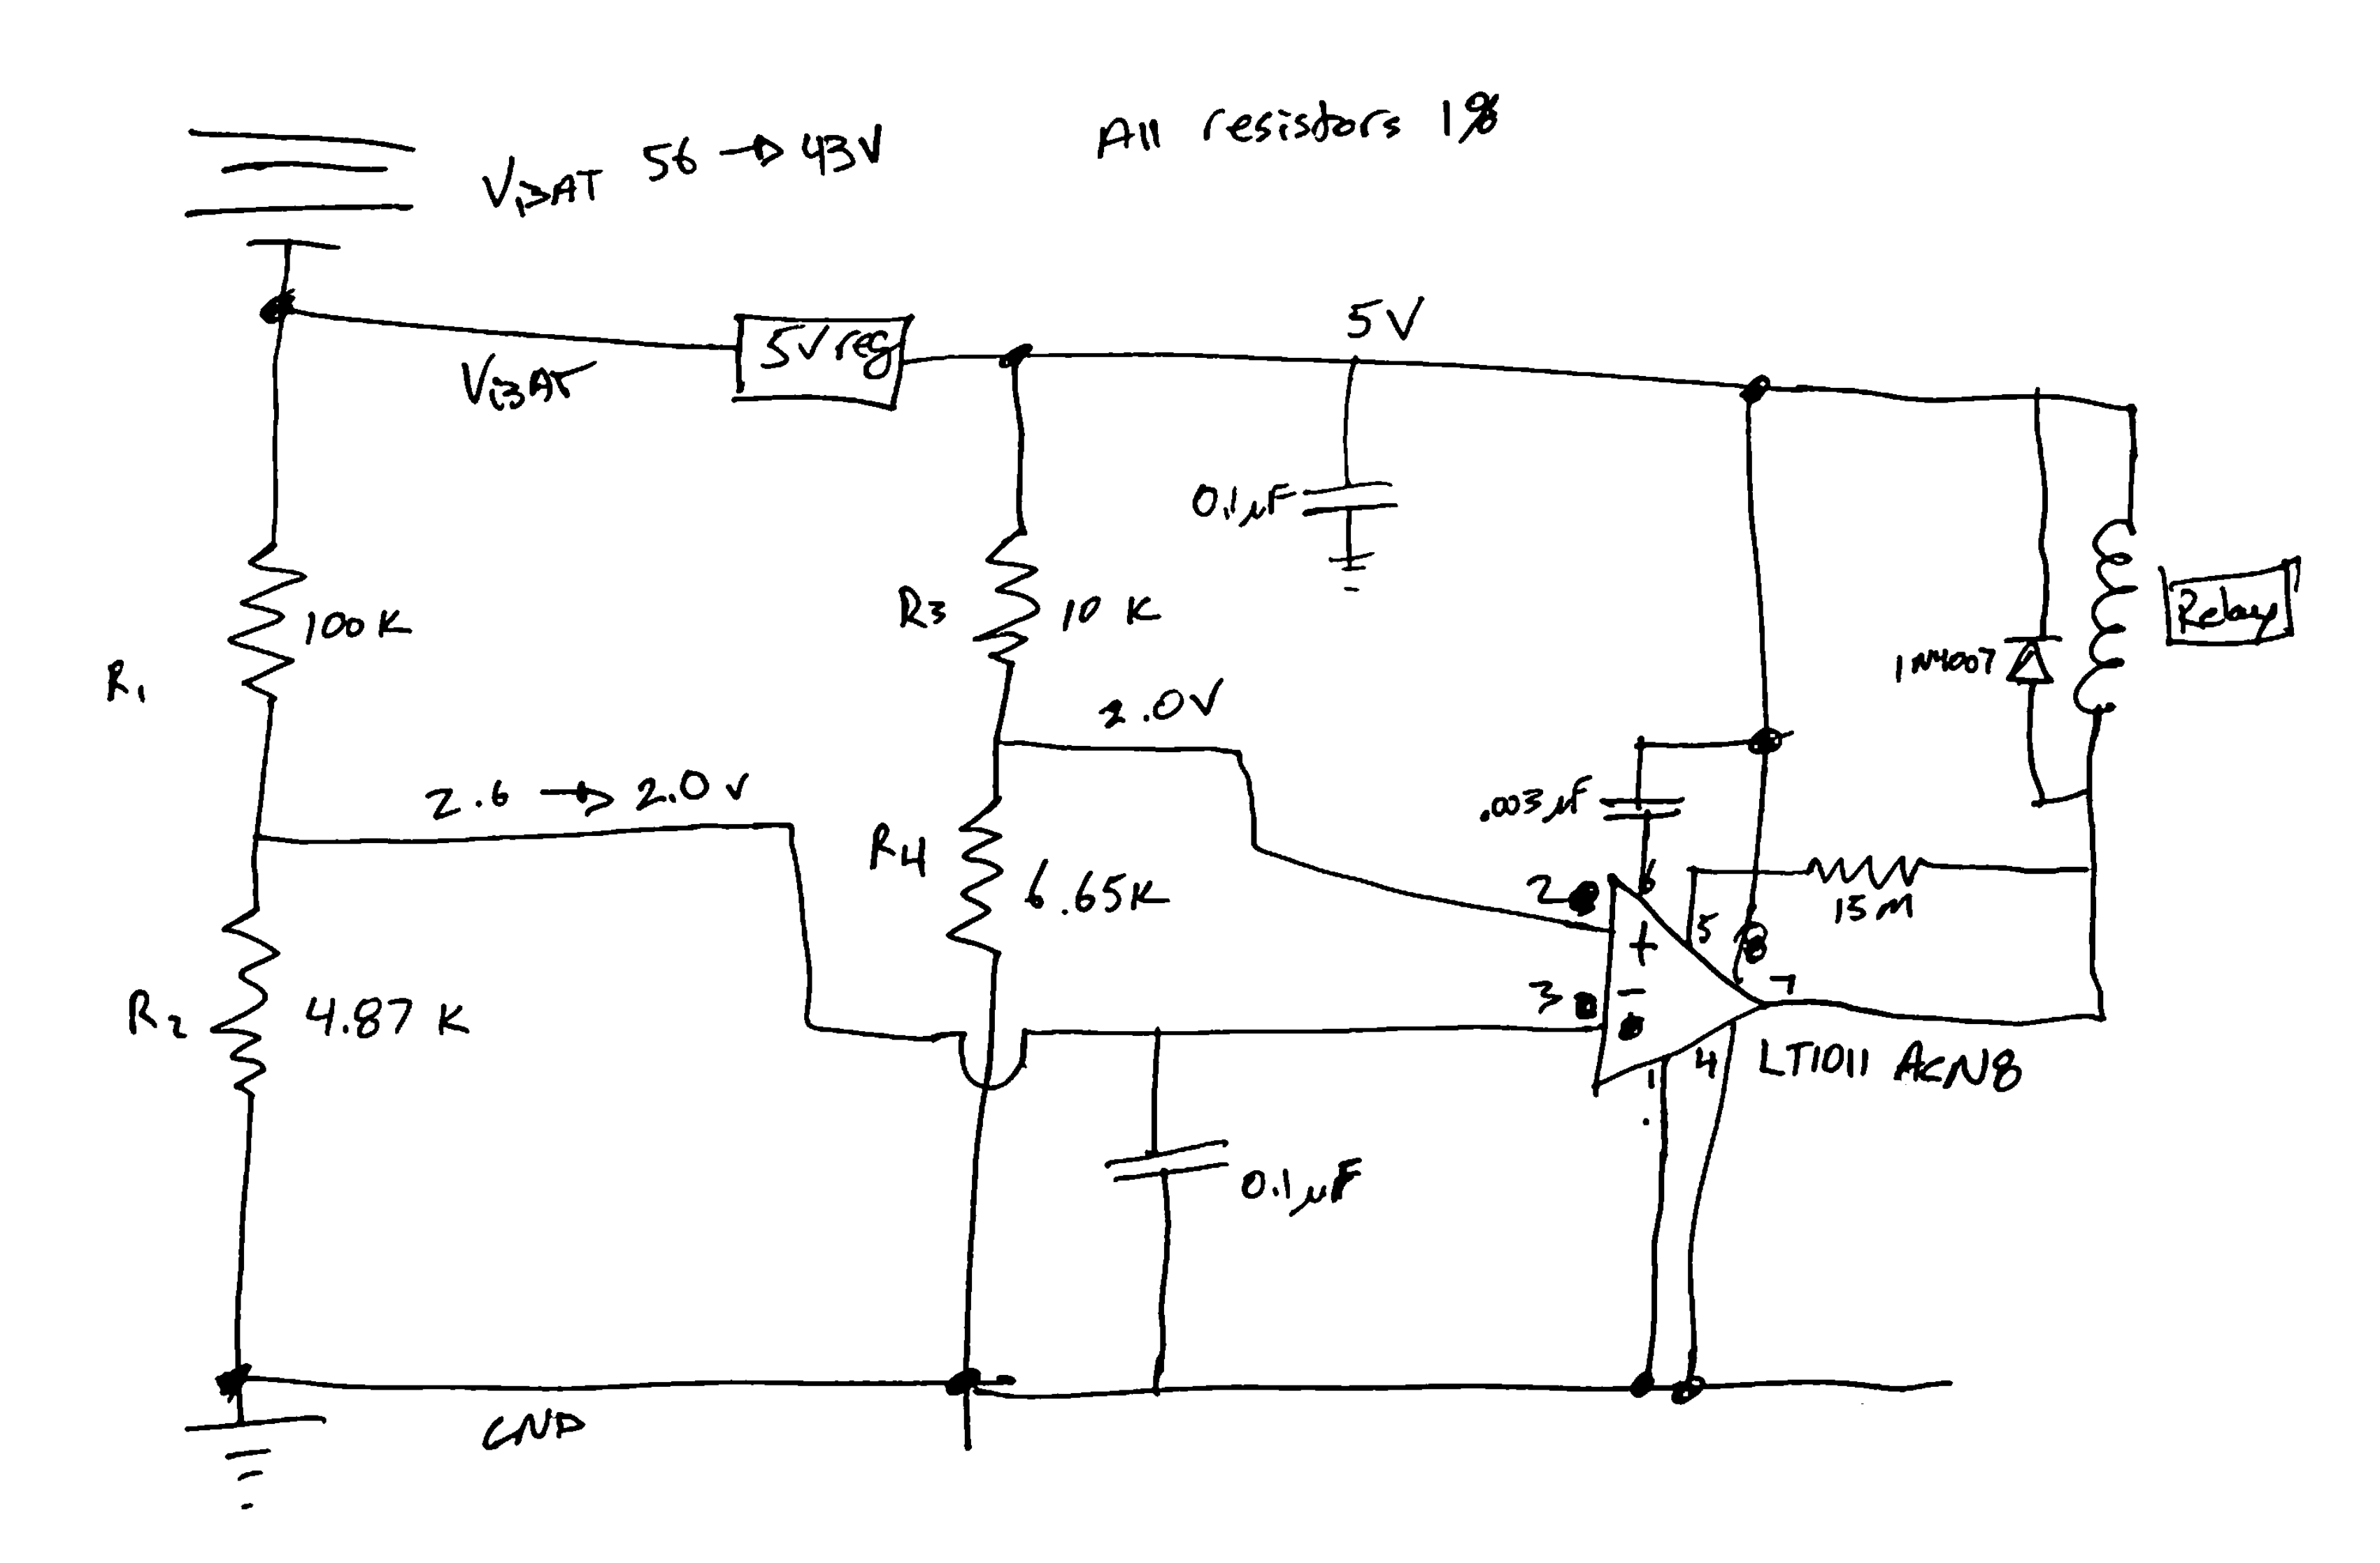 battery monitoring circuit schematic